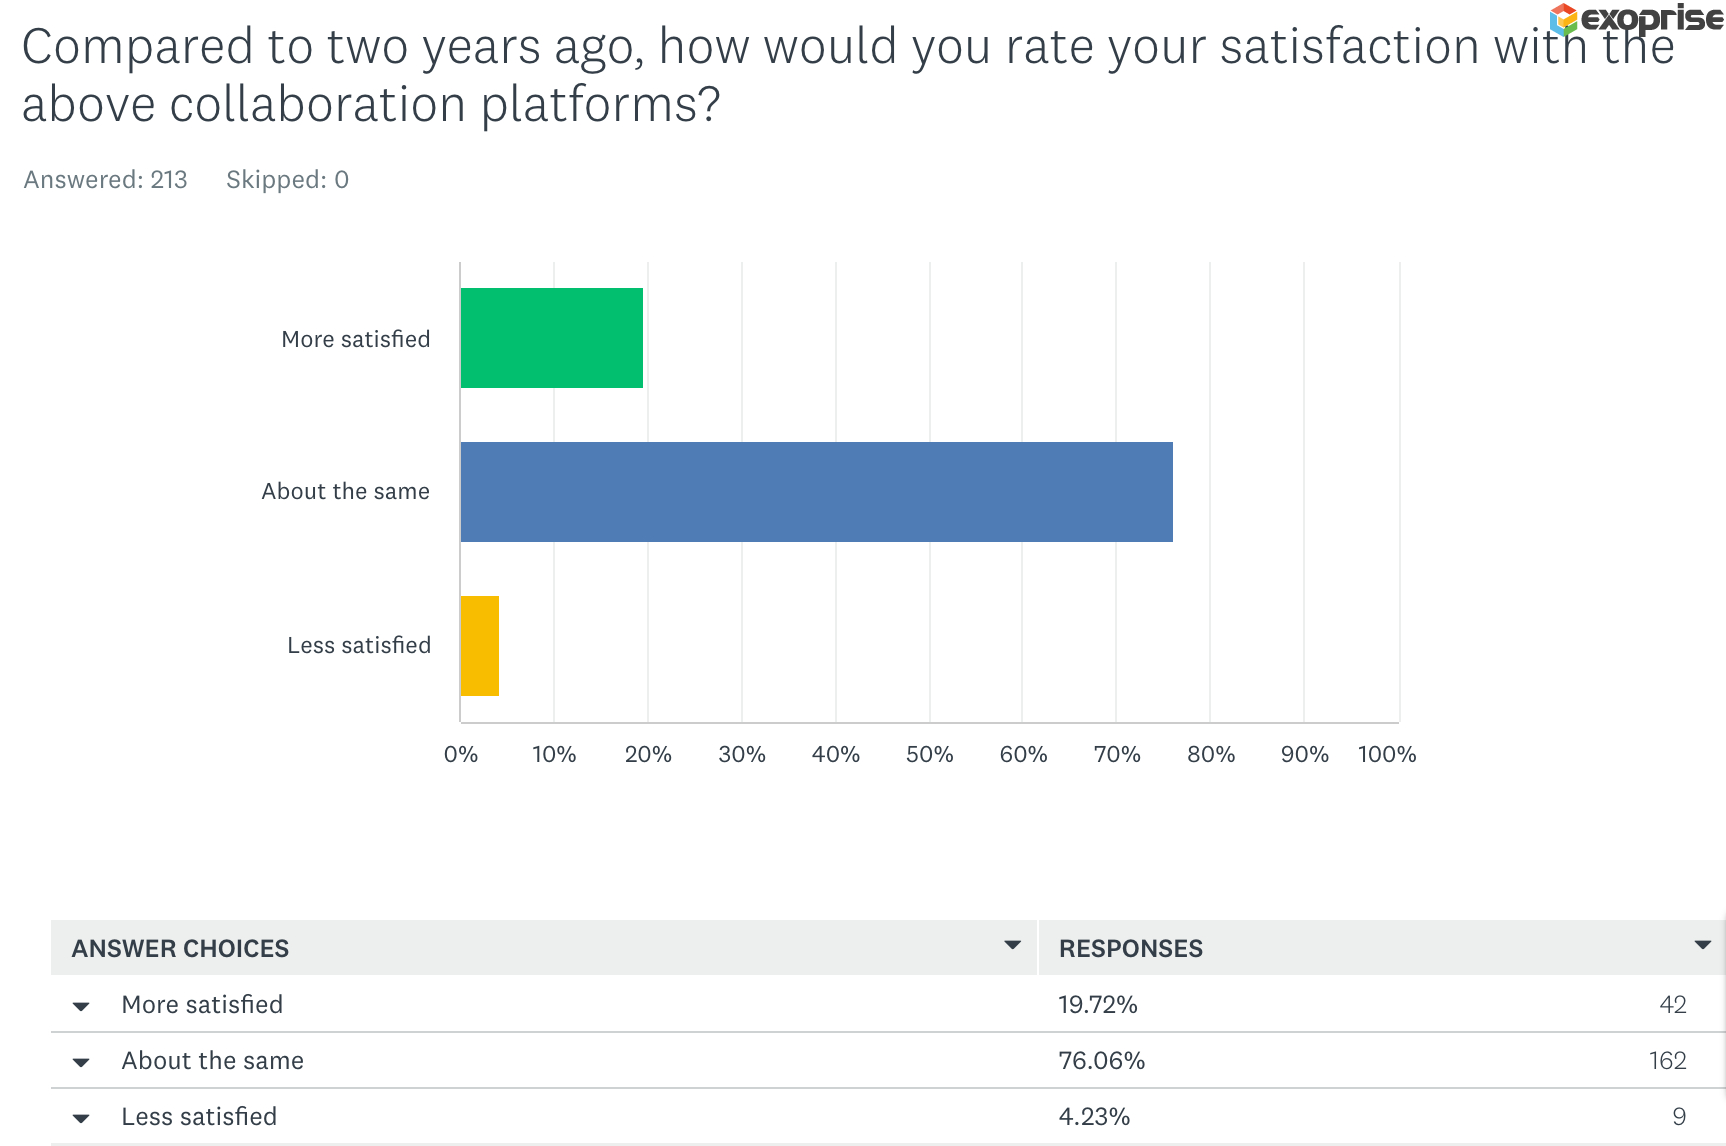 Has your satisfaction with collaboration platforms increased or decreased?